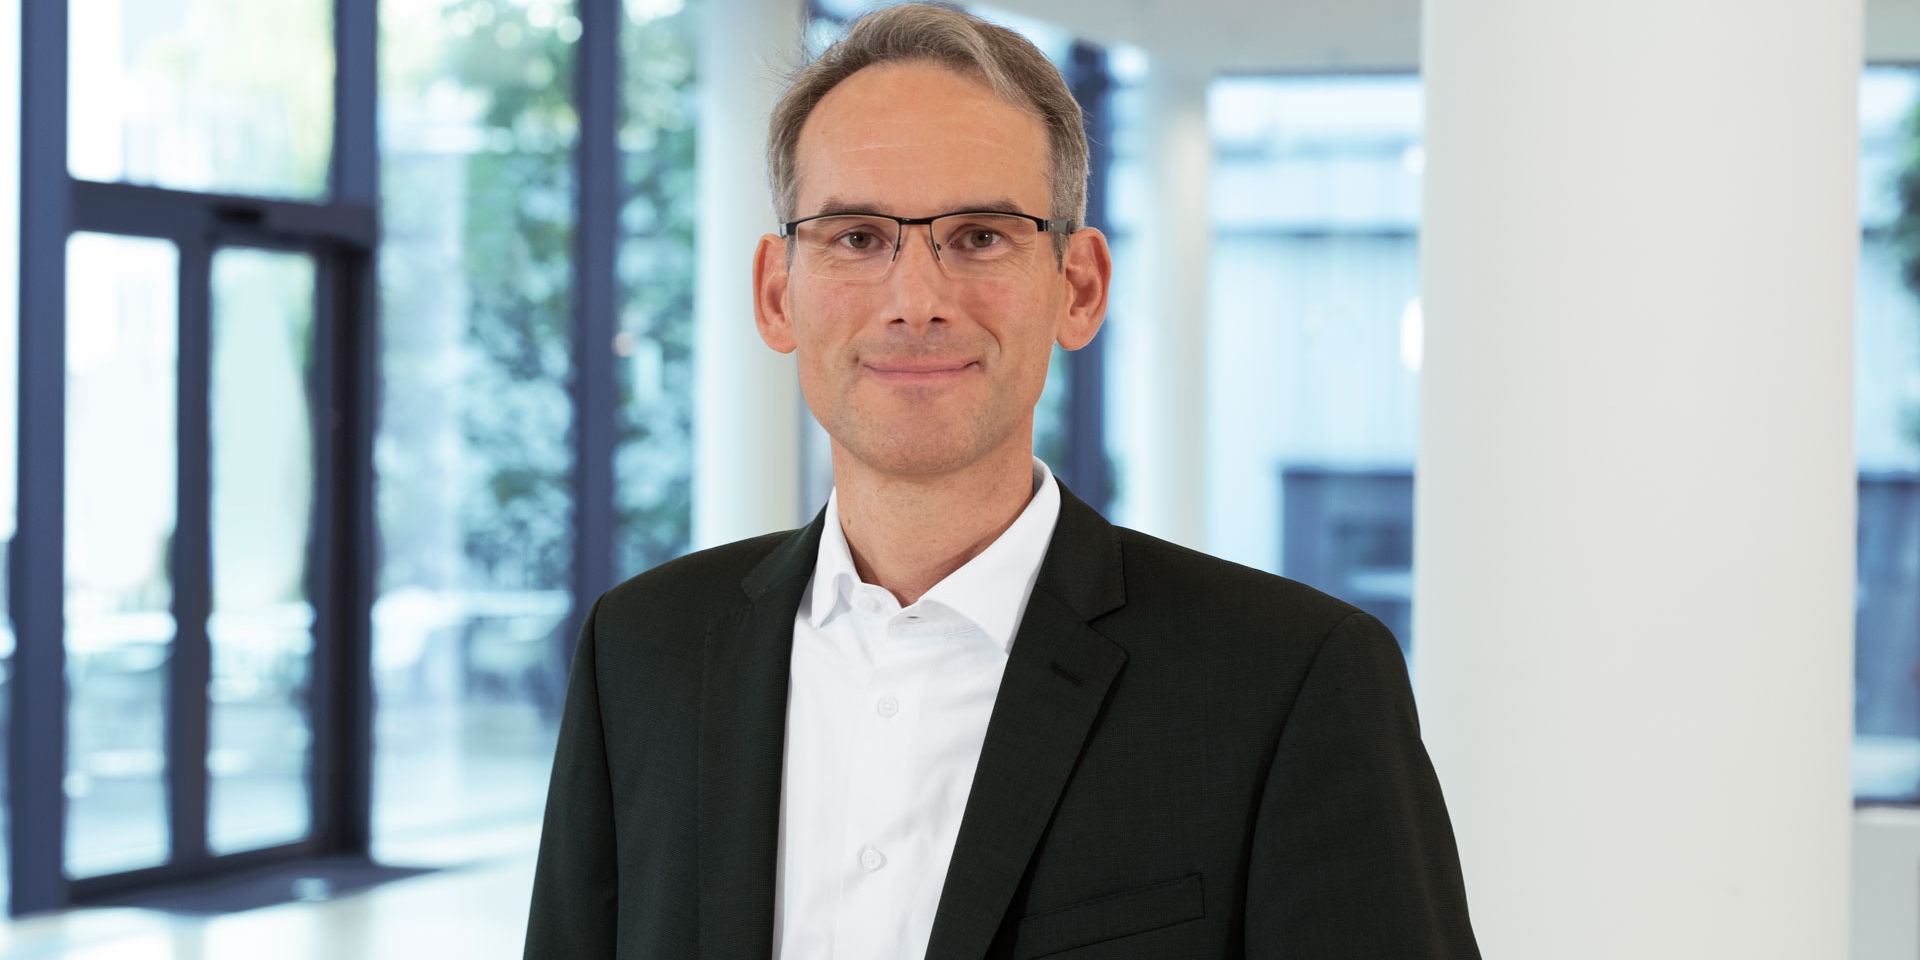 Dr. Markus Weber Member of the Executive Board of the ZEISS Group